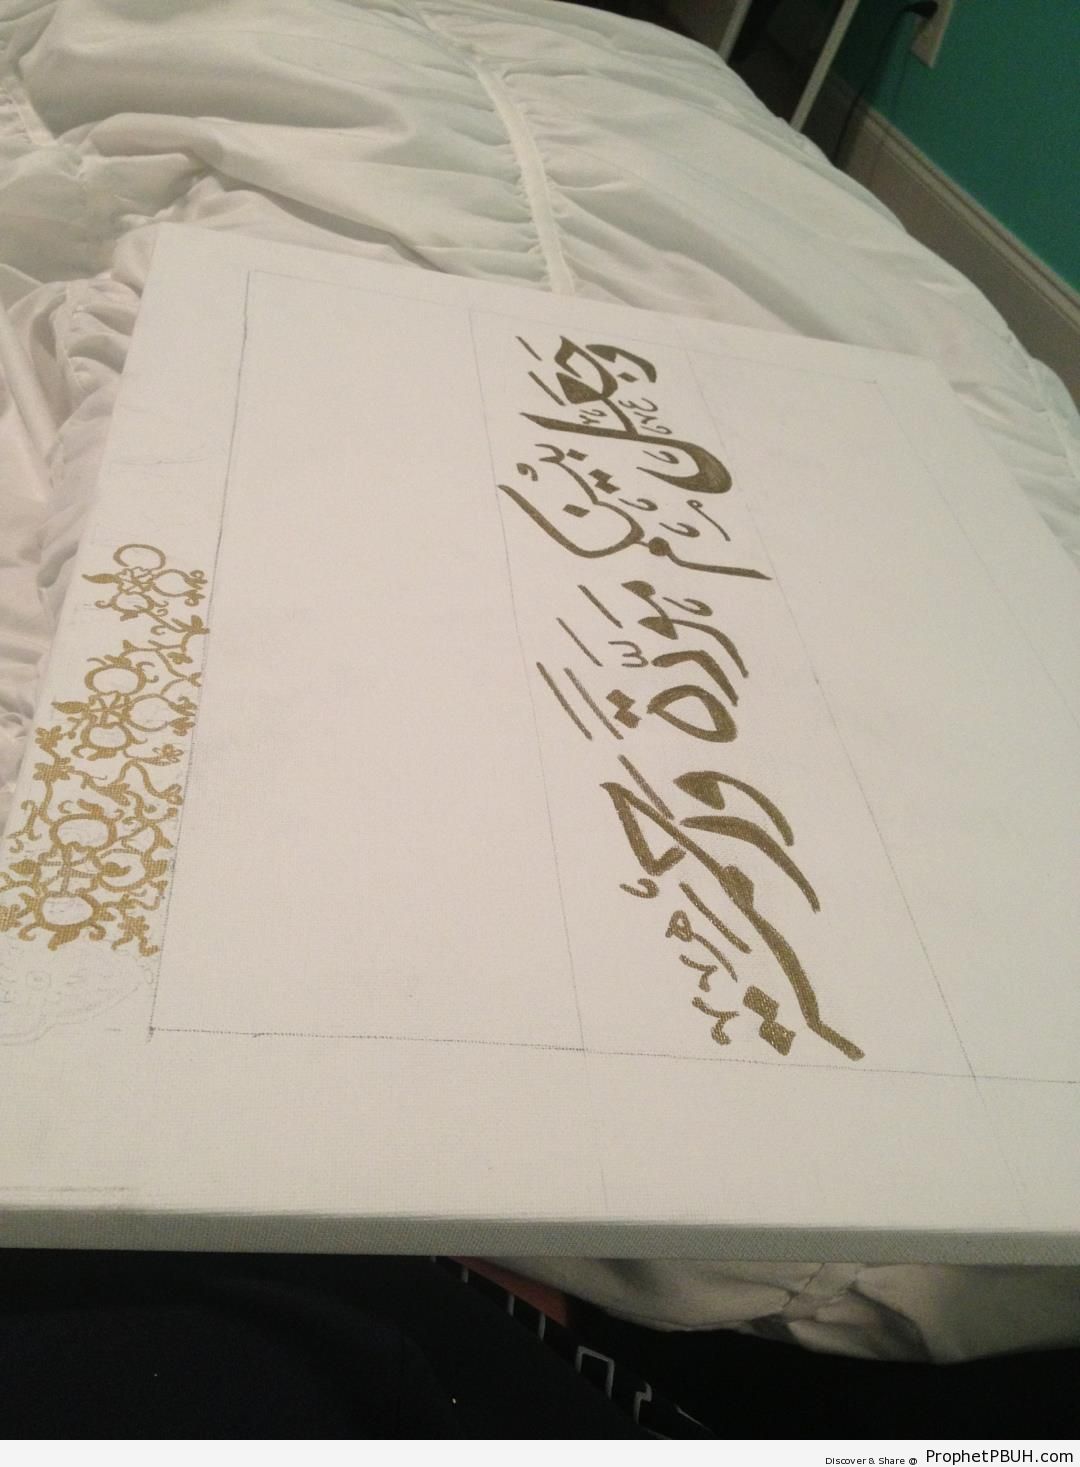 He created between you (in marriage) love and affection - Islamic Calligraphy and Typography 